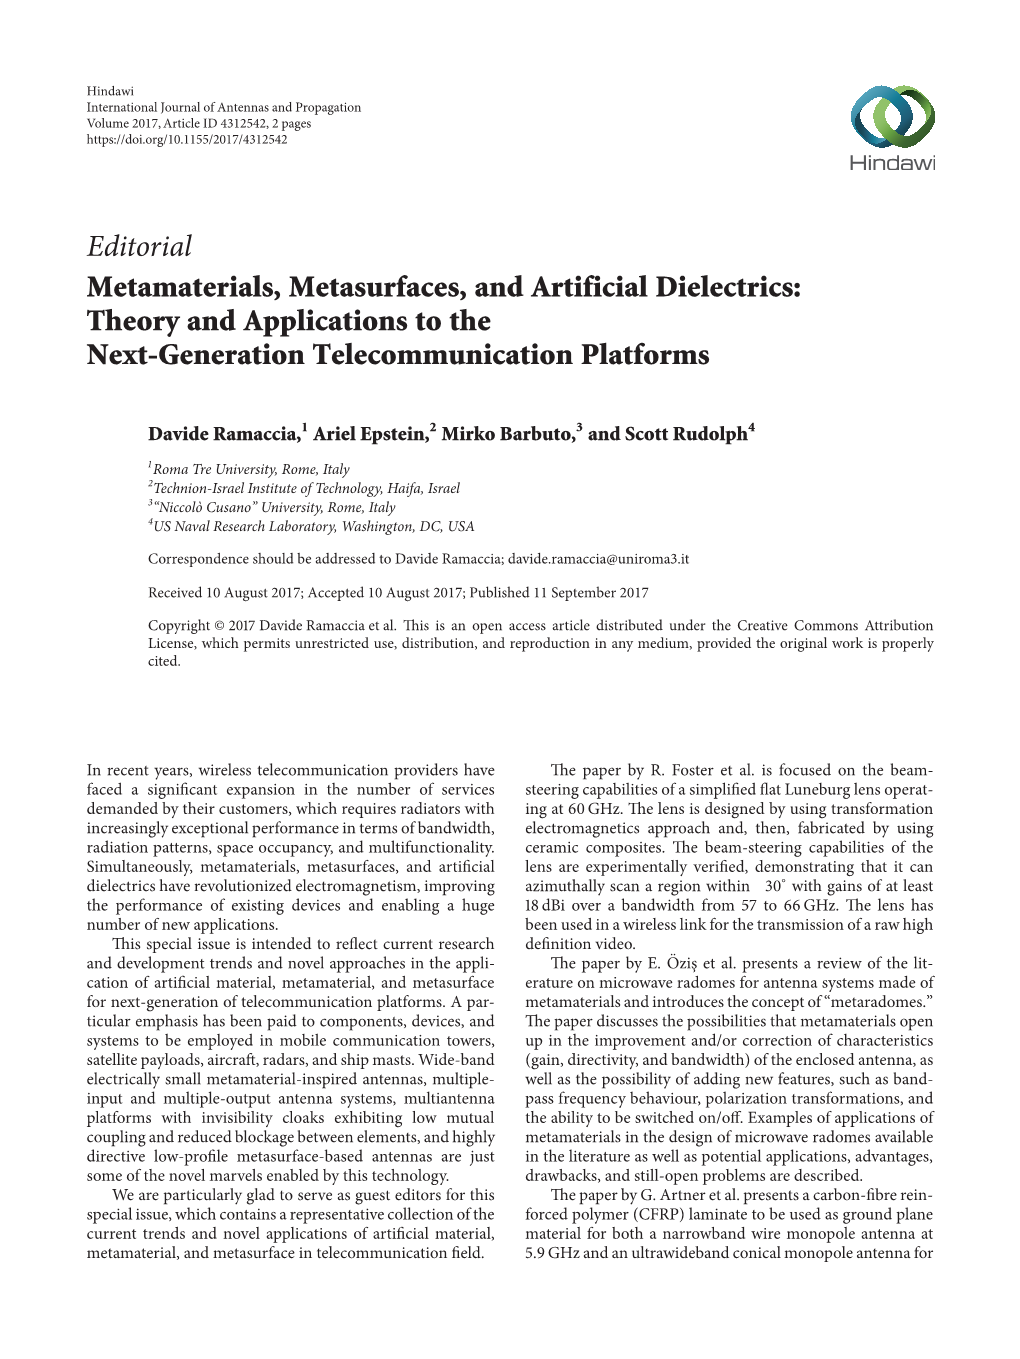 Editorial Metamaterials, Metasurfaces, and Artificial Dielectrics: Theory and Applications to the Next-Generation Telecommunication Platforms